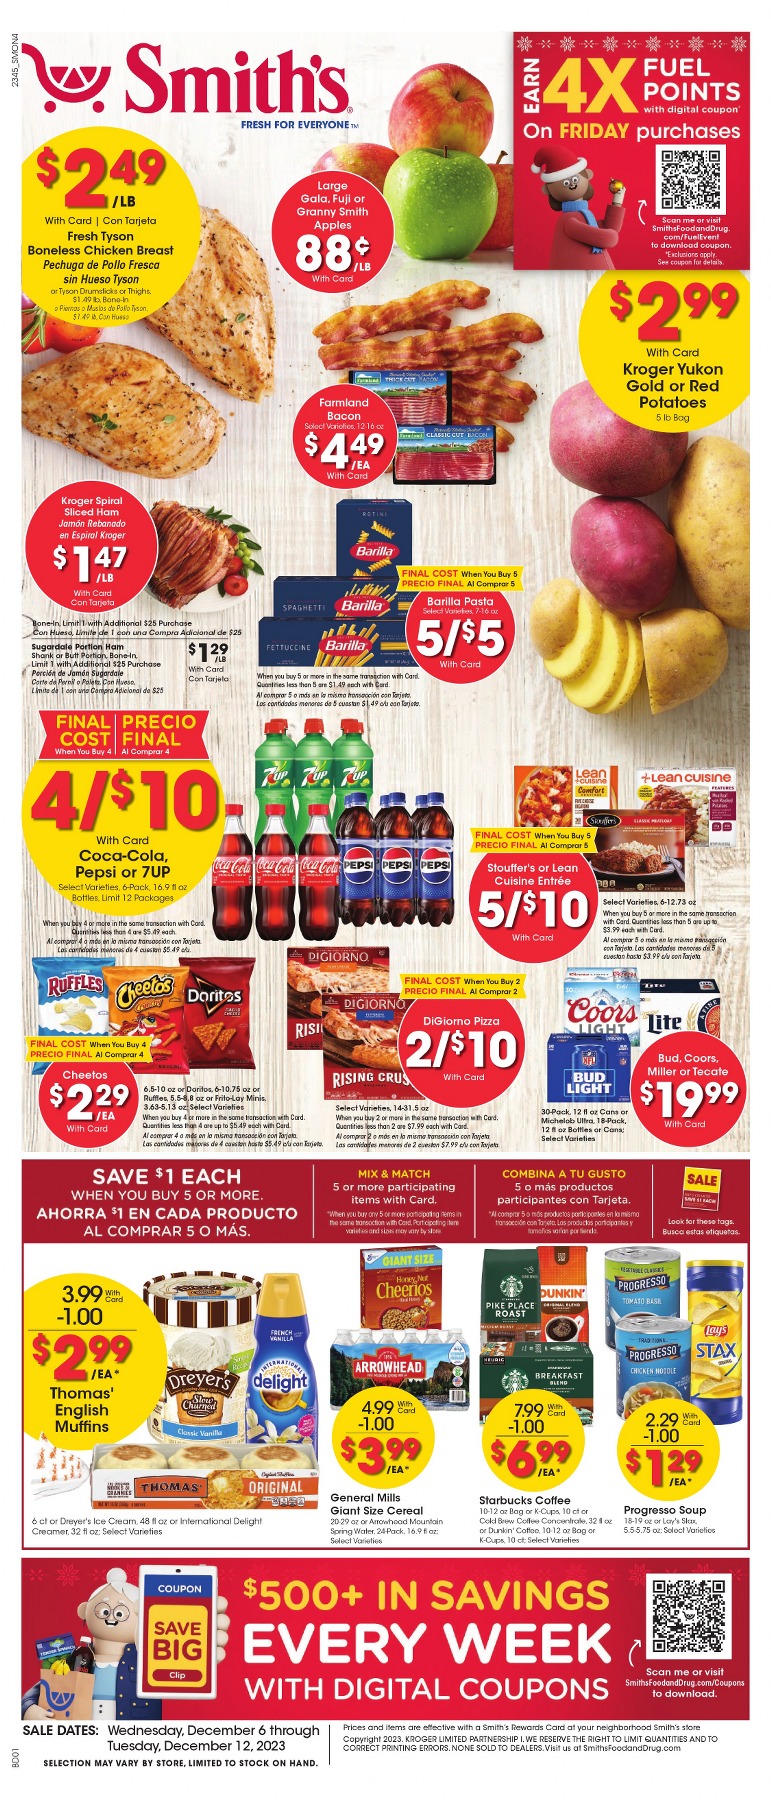 Smith's Weekly Ad December 6 to December 12, 2023 1 – smiths ad 1